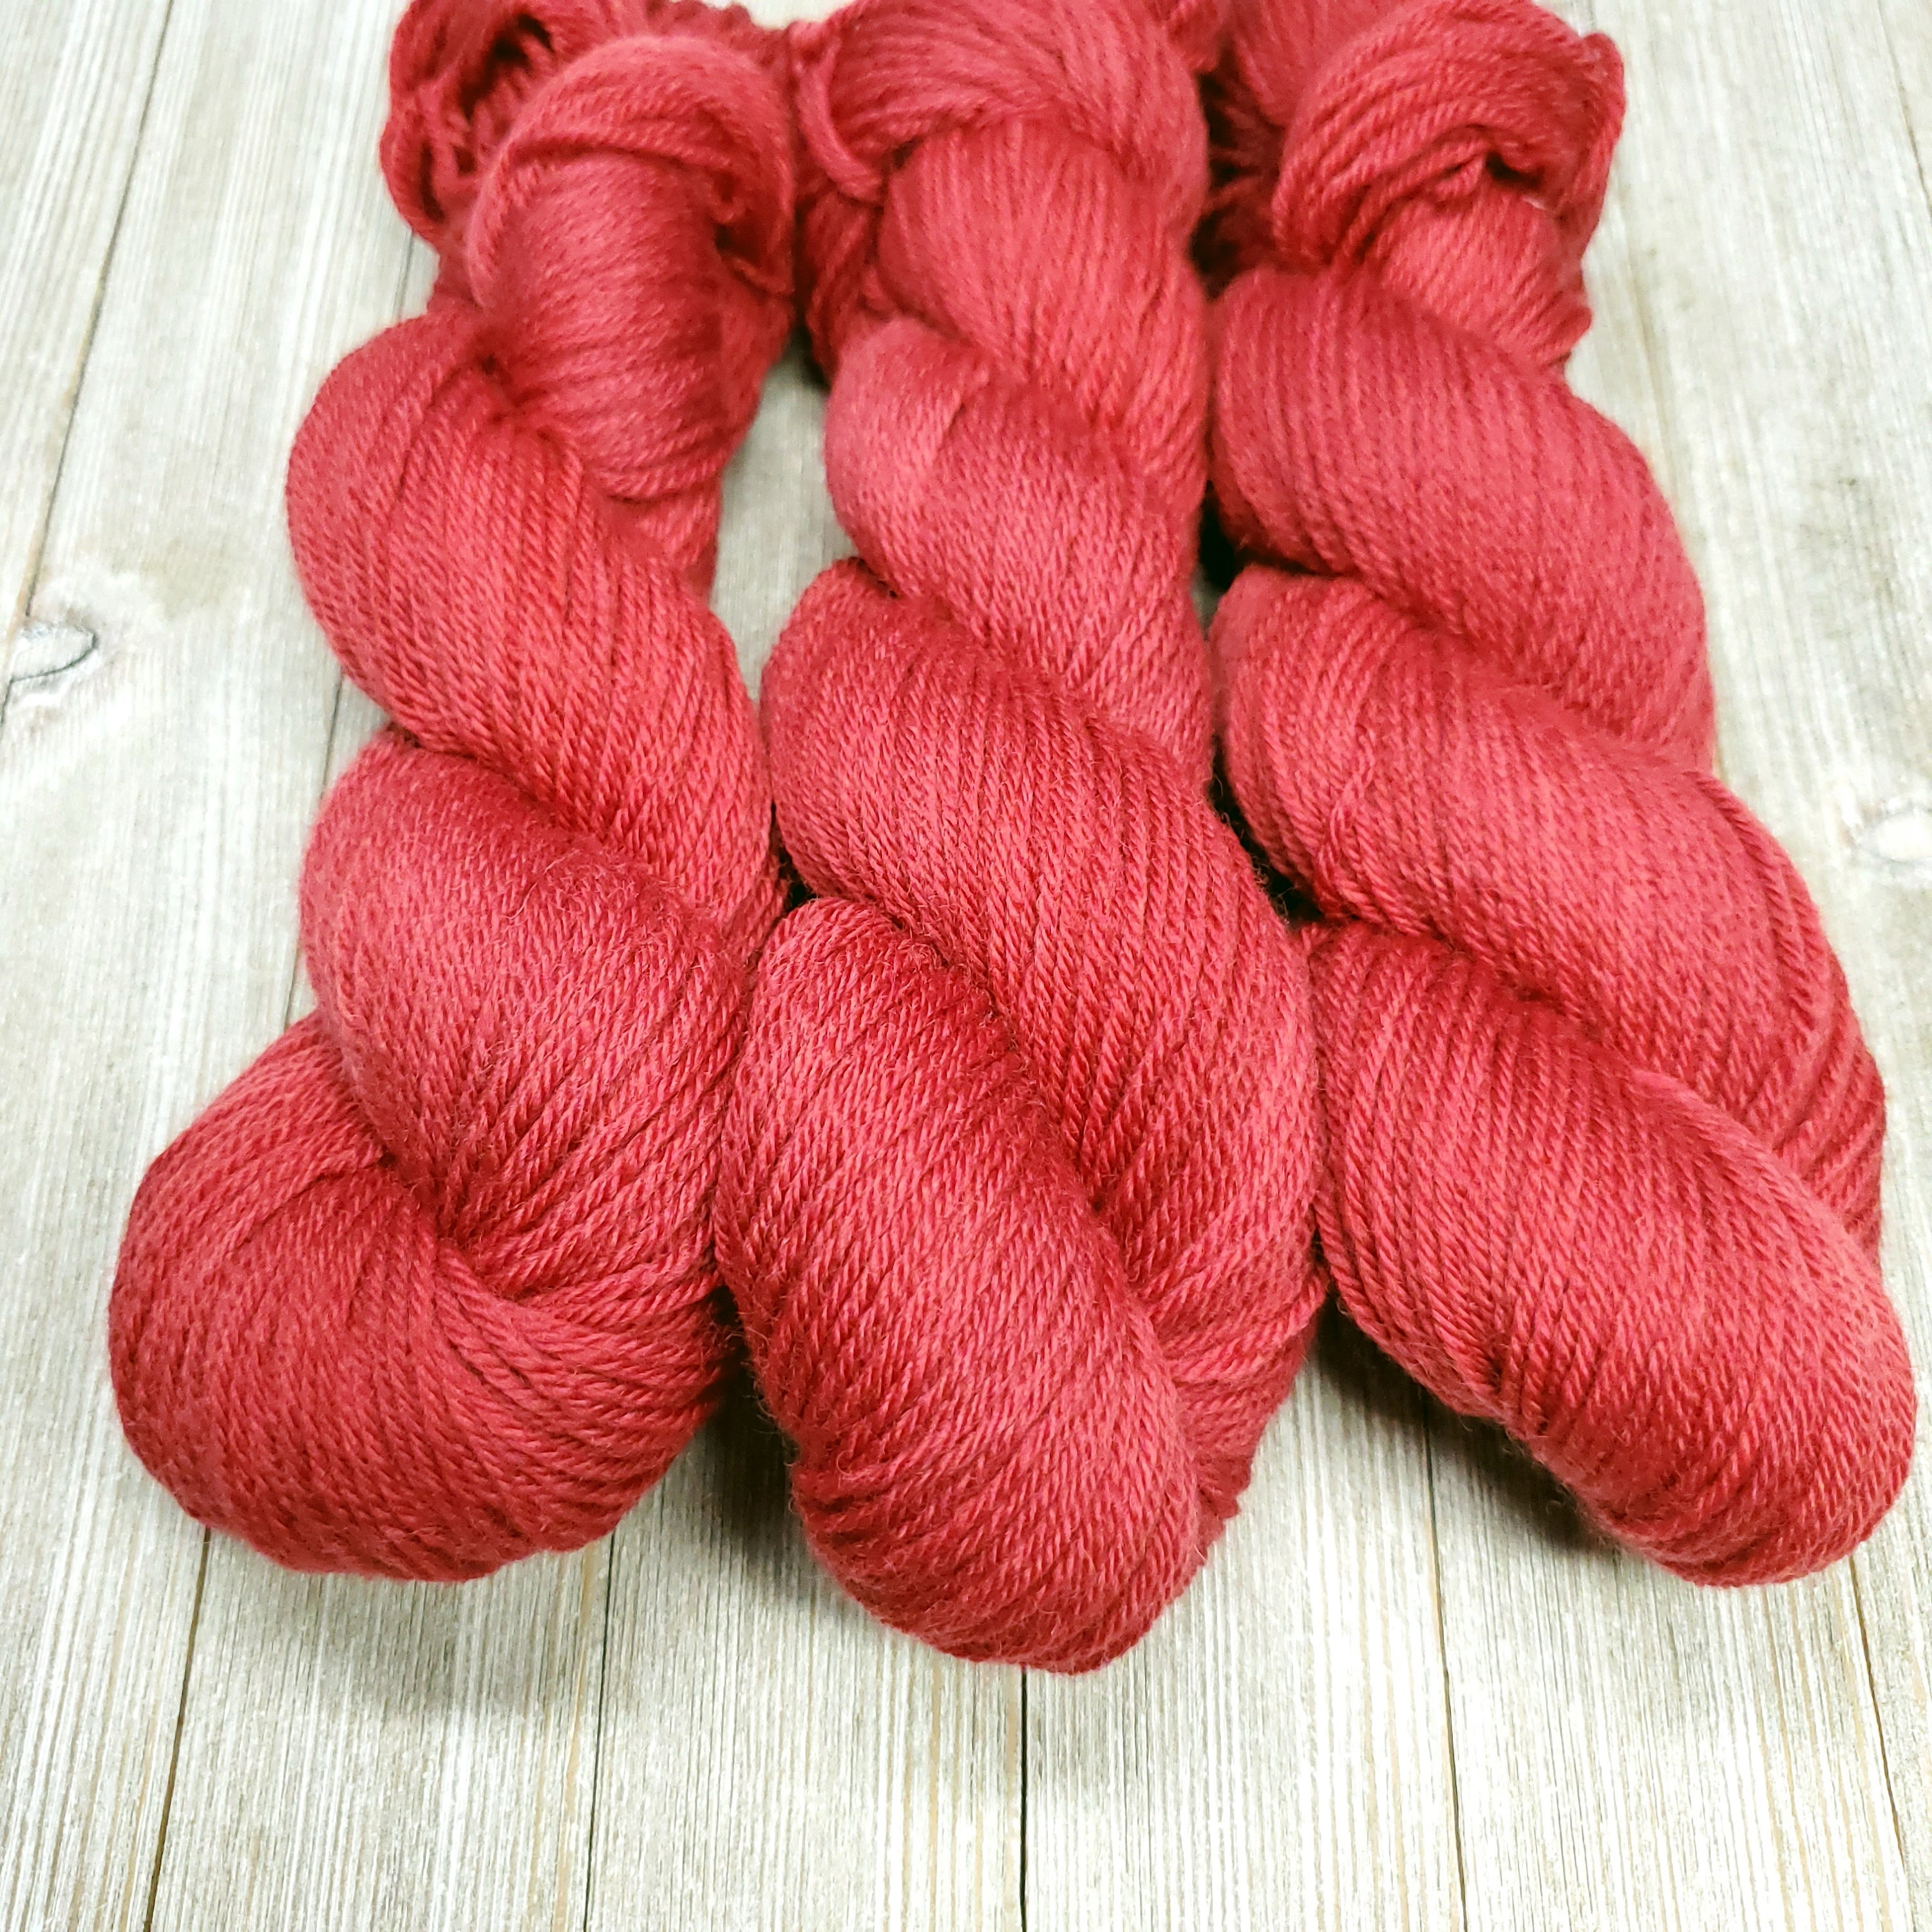 14 yd Premium Wool POMEGRANATE Hand-Dyed Wool Collection